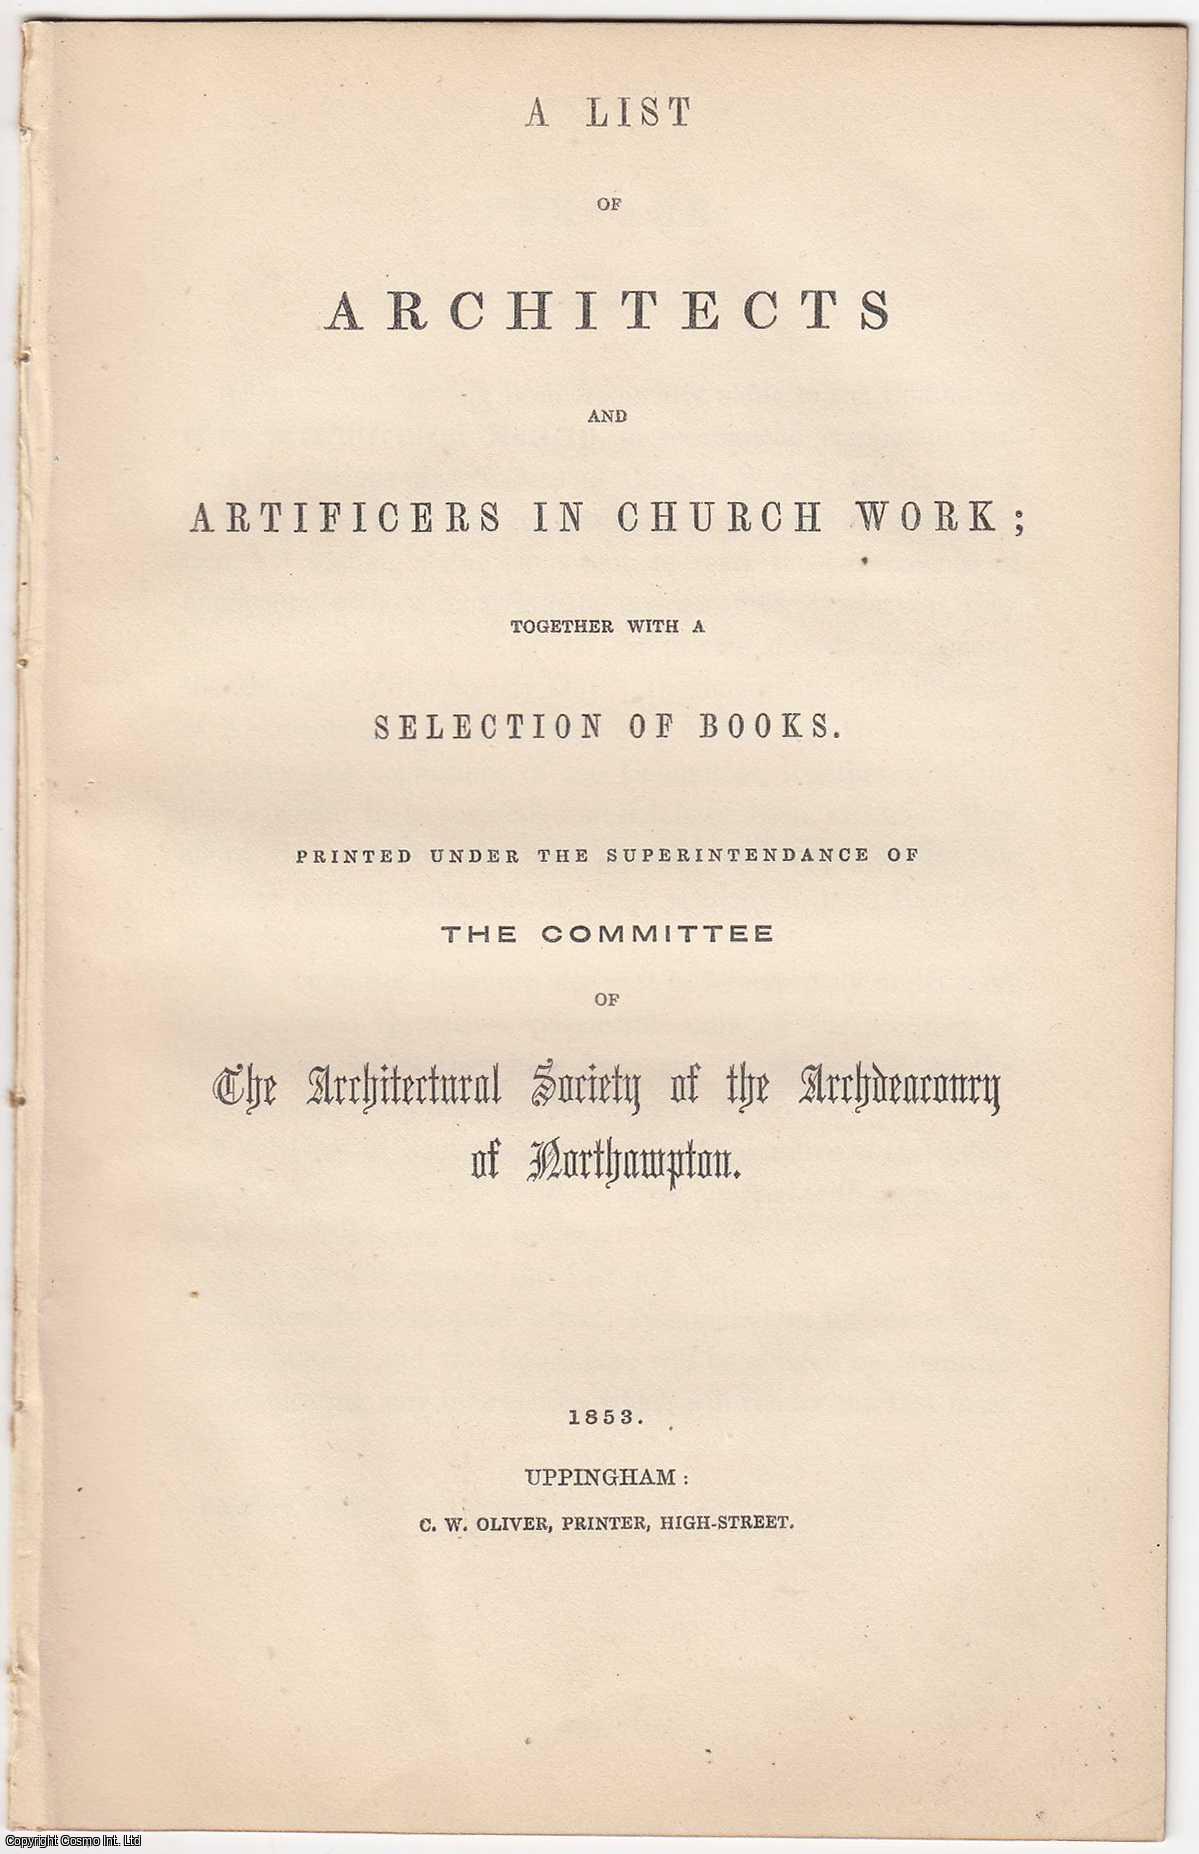 --- - [1853] A List of Architects and Artificers in Church Work; together with a Selection of Books. Printed under the Superintendance of The Committee of The Architectural Society of the Archdeaconry of Northampton.